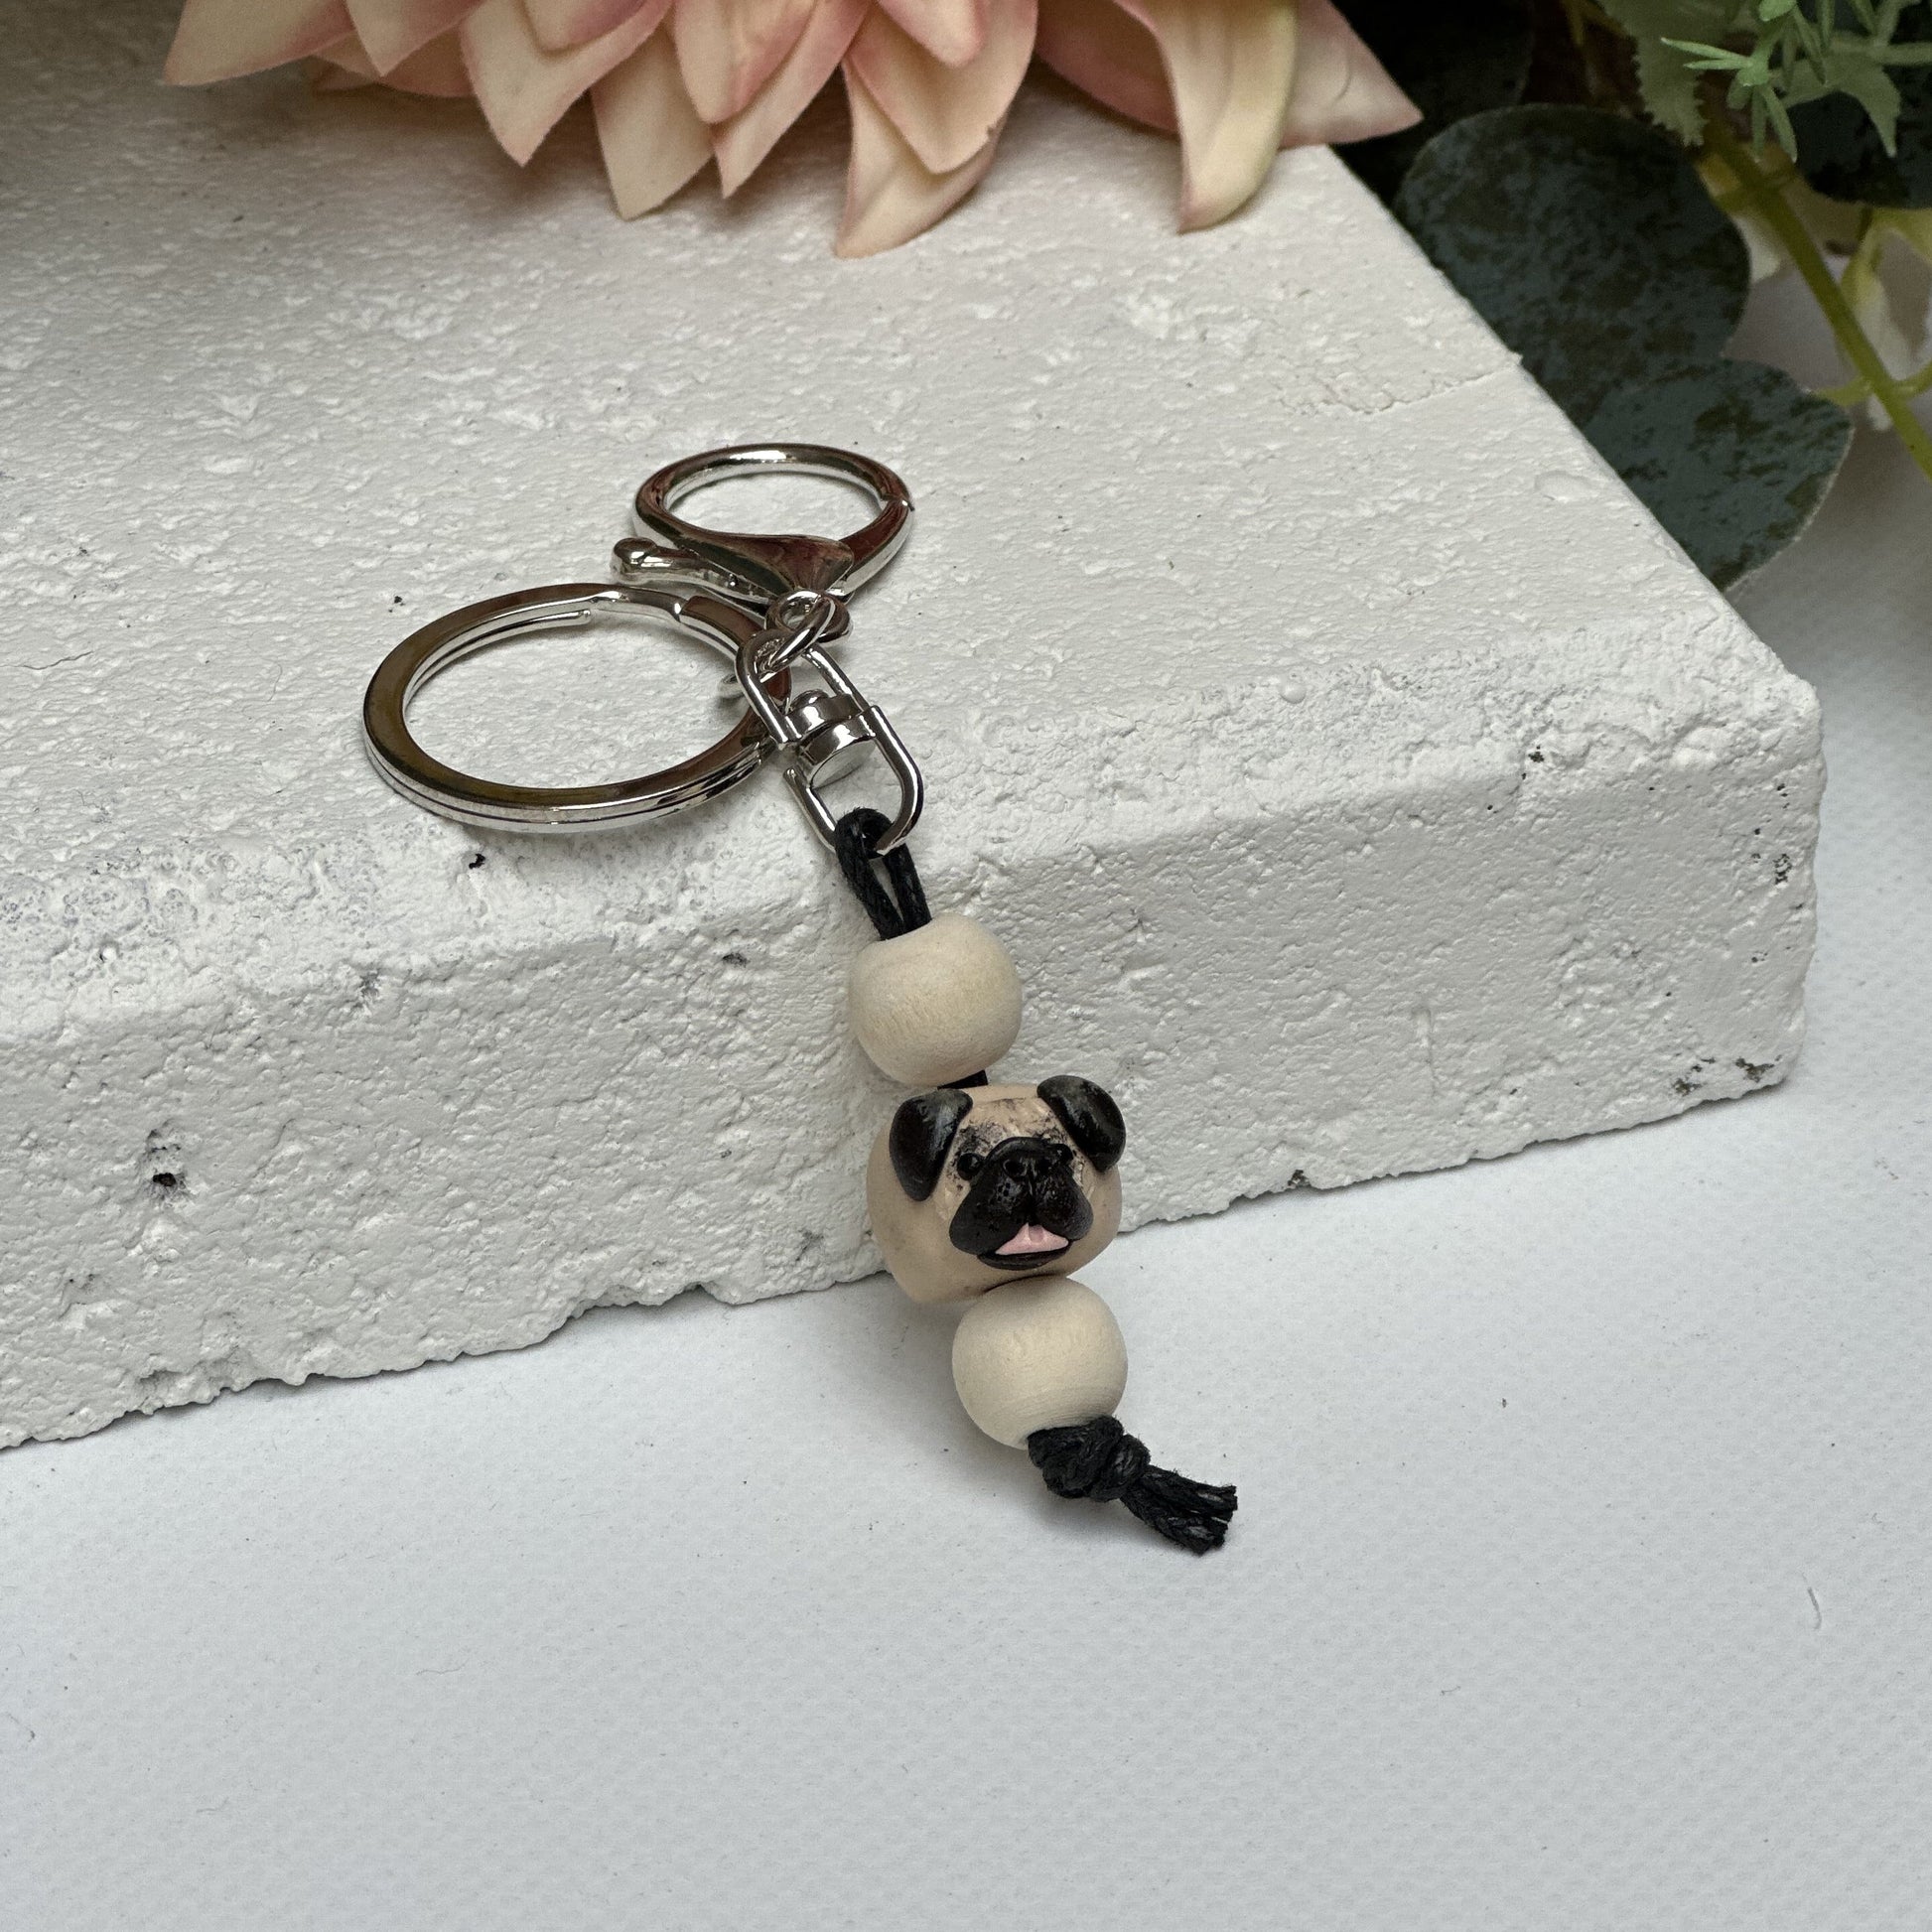 Handmade pug polymer clay and timber keying on white textured background with a pink flower in the background